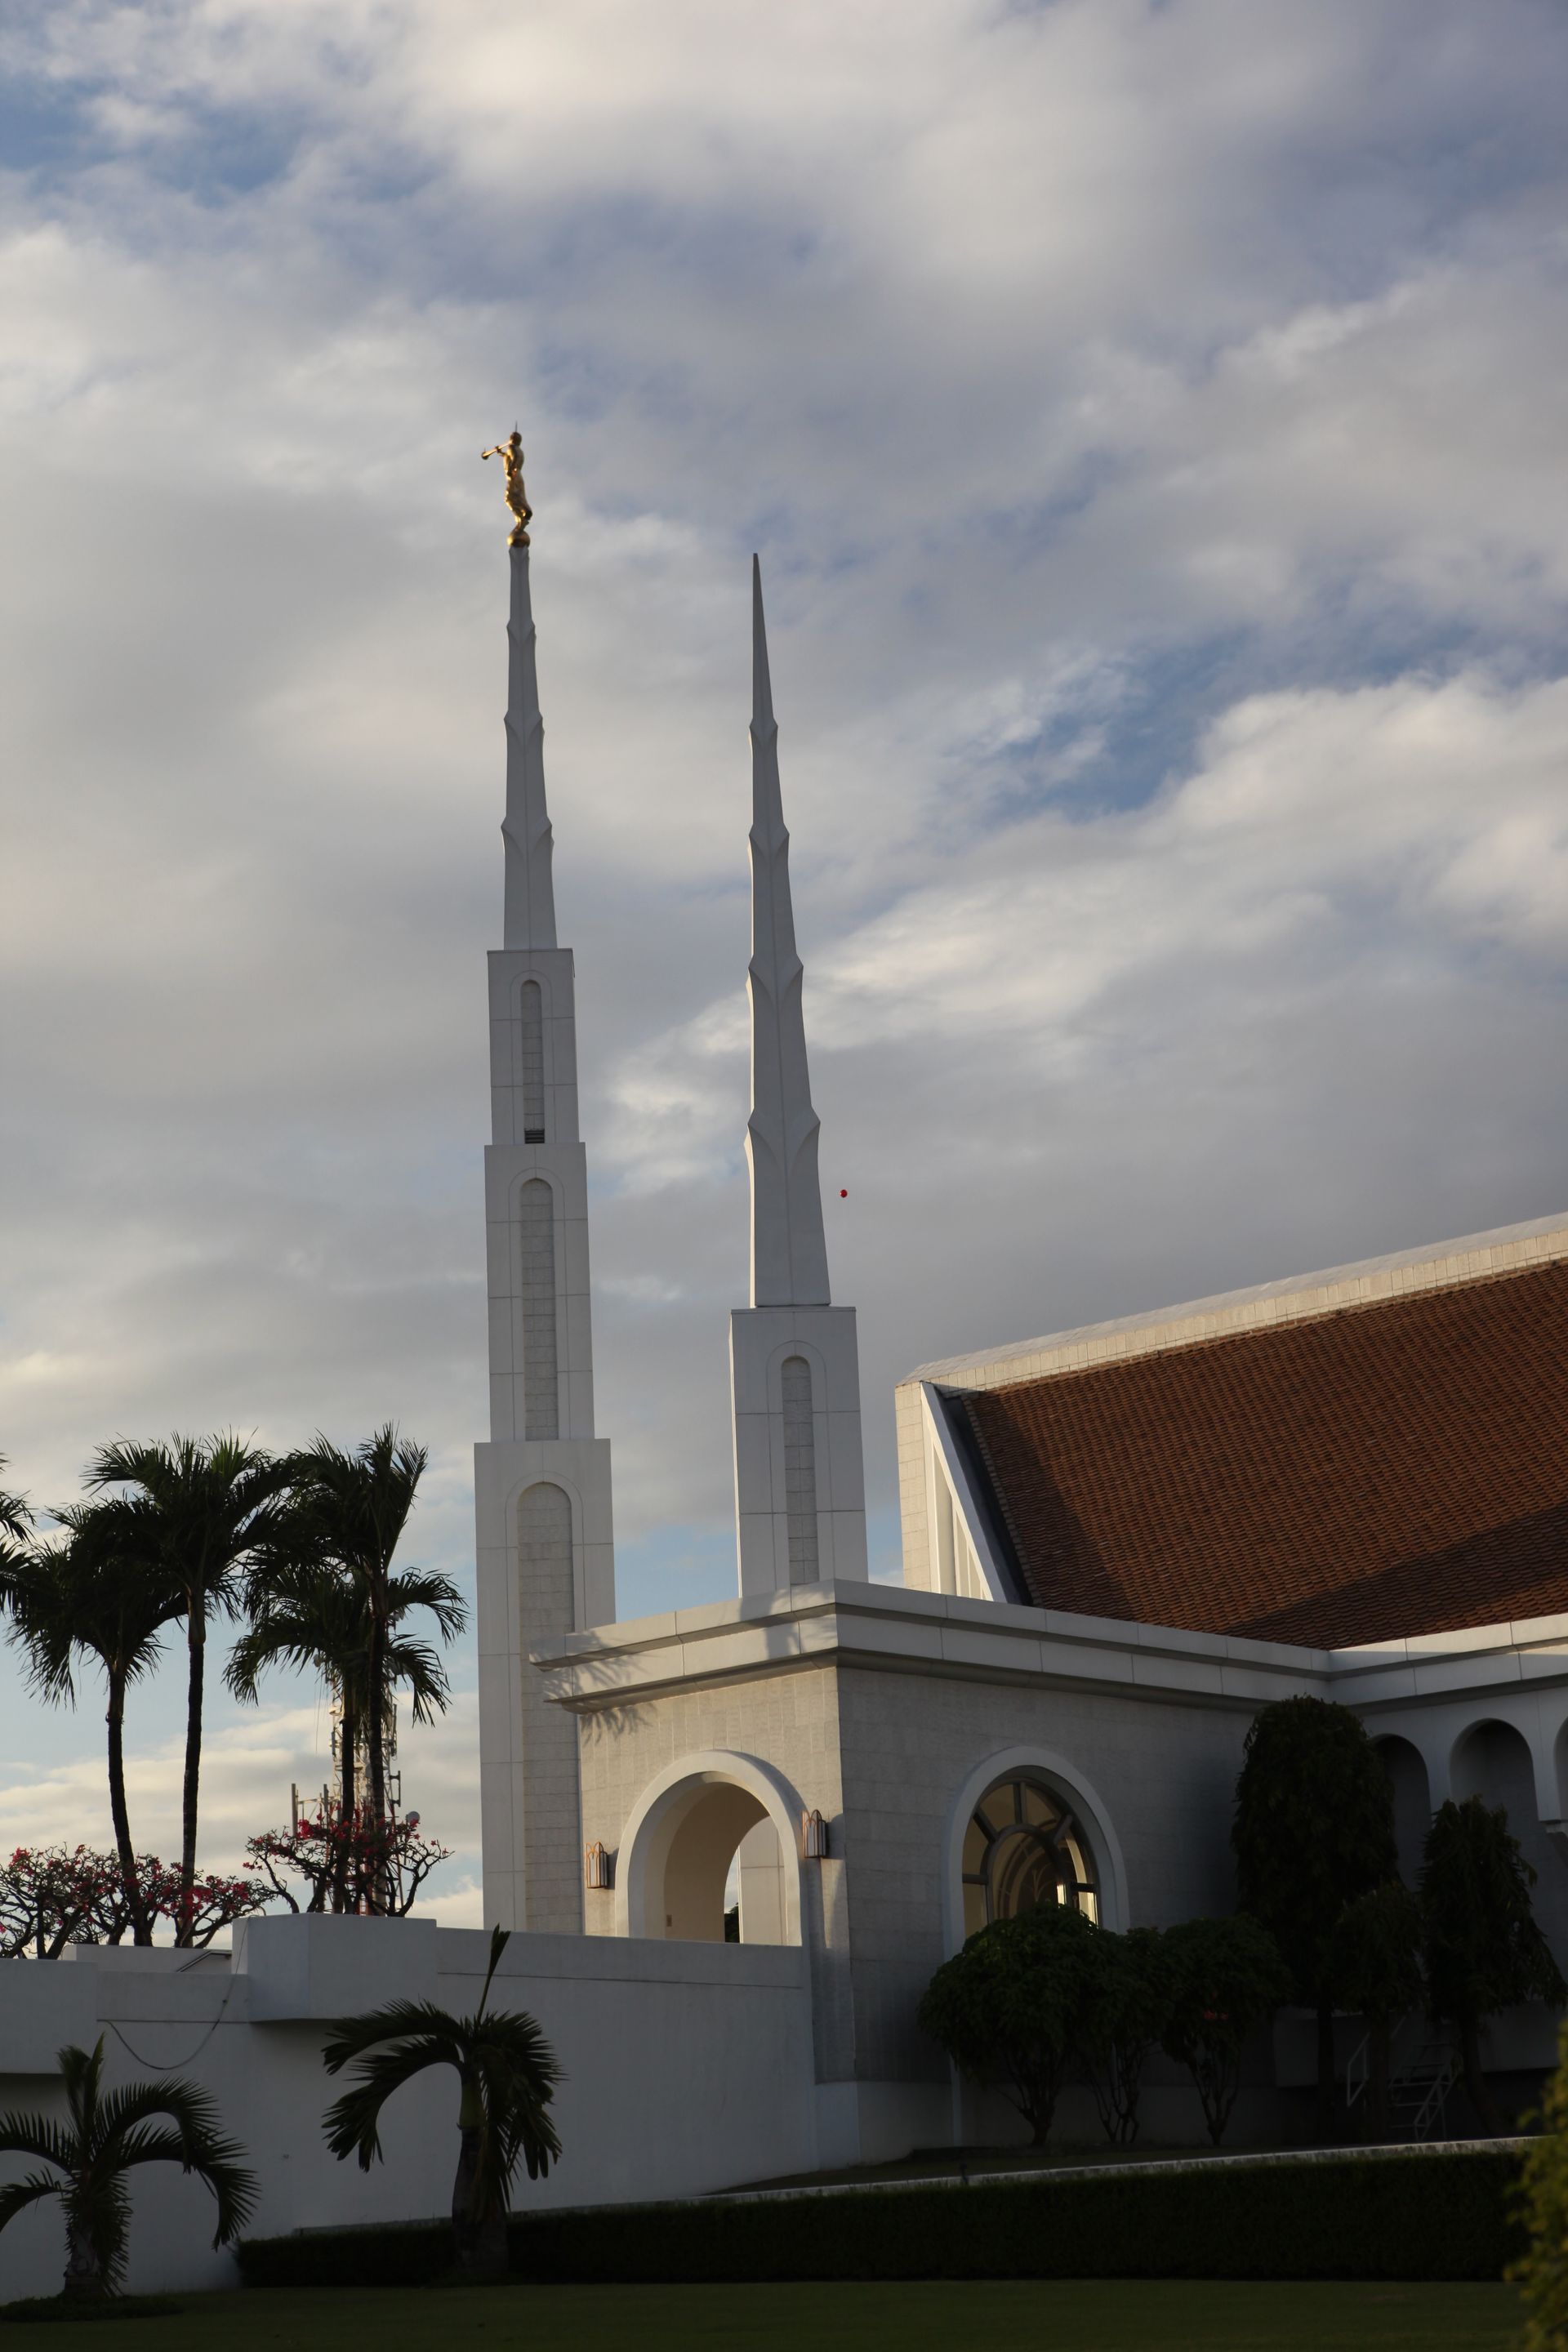 The Manila Philippines Temple spires, including the entrance and scenery.